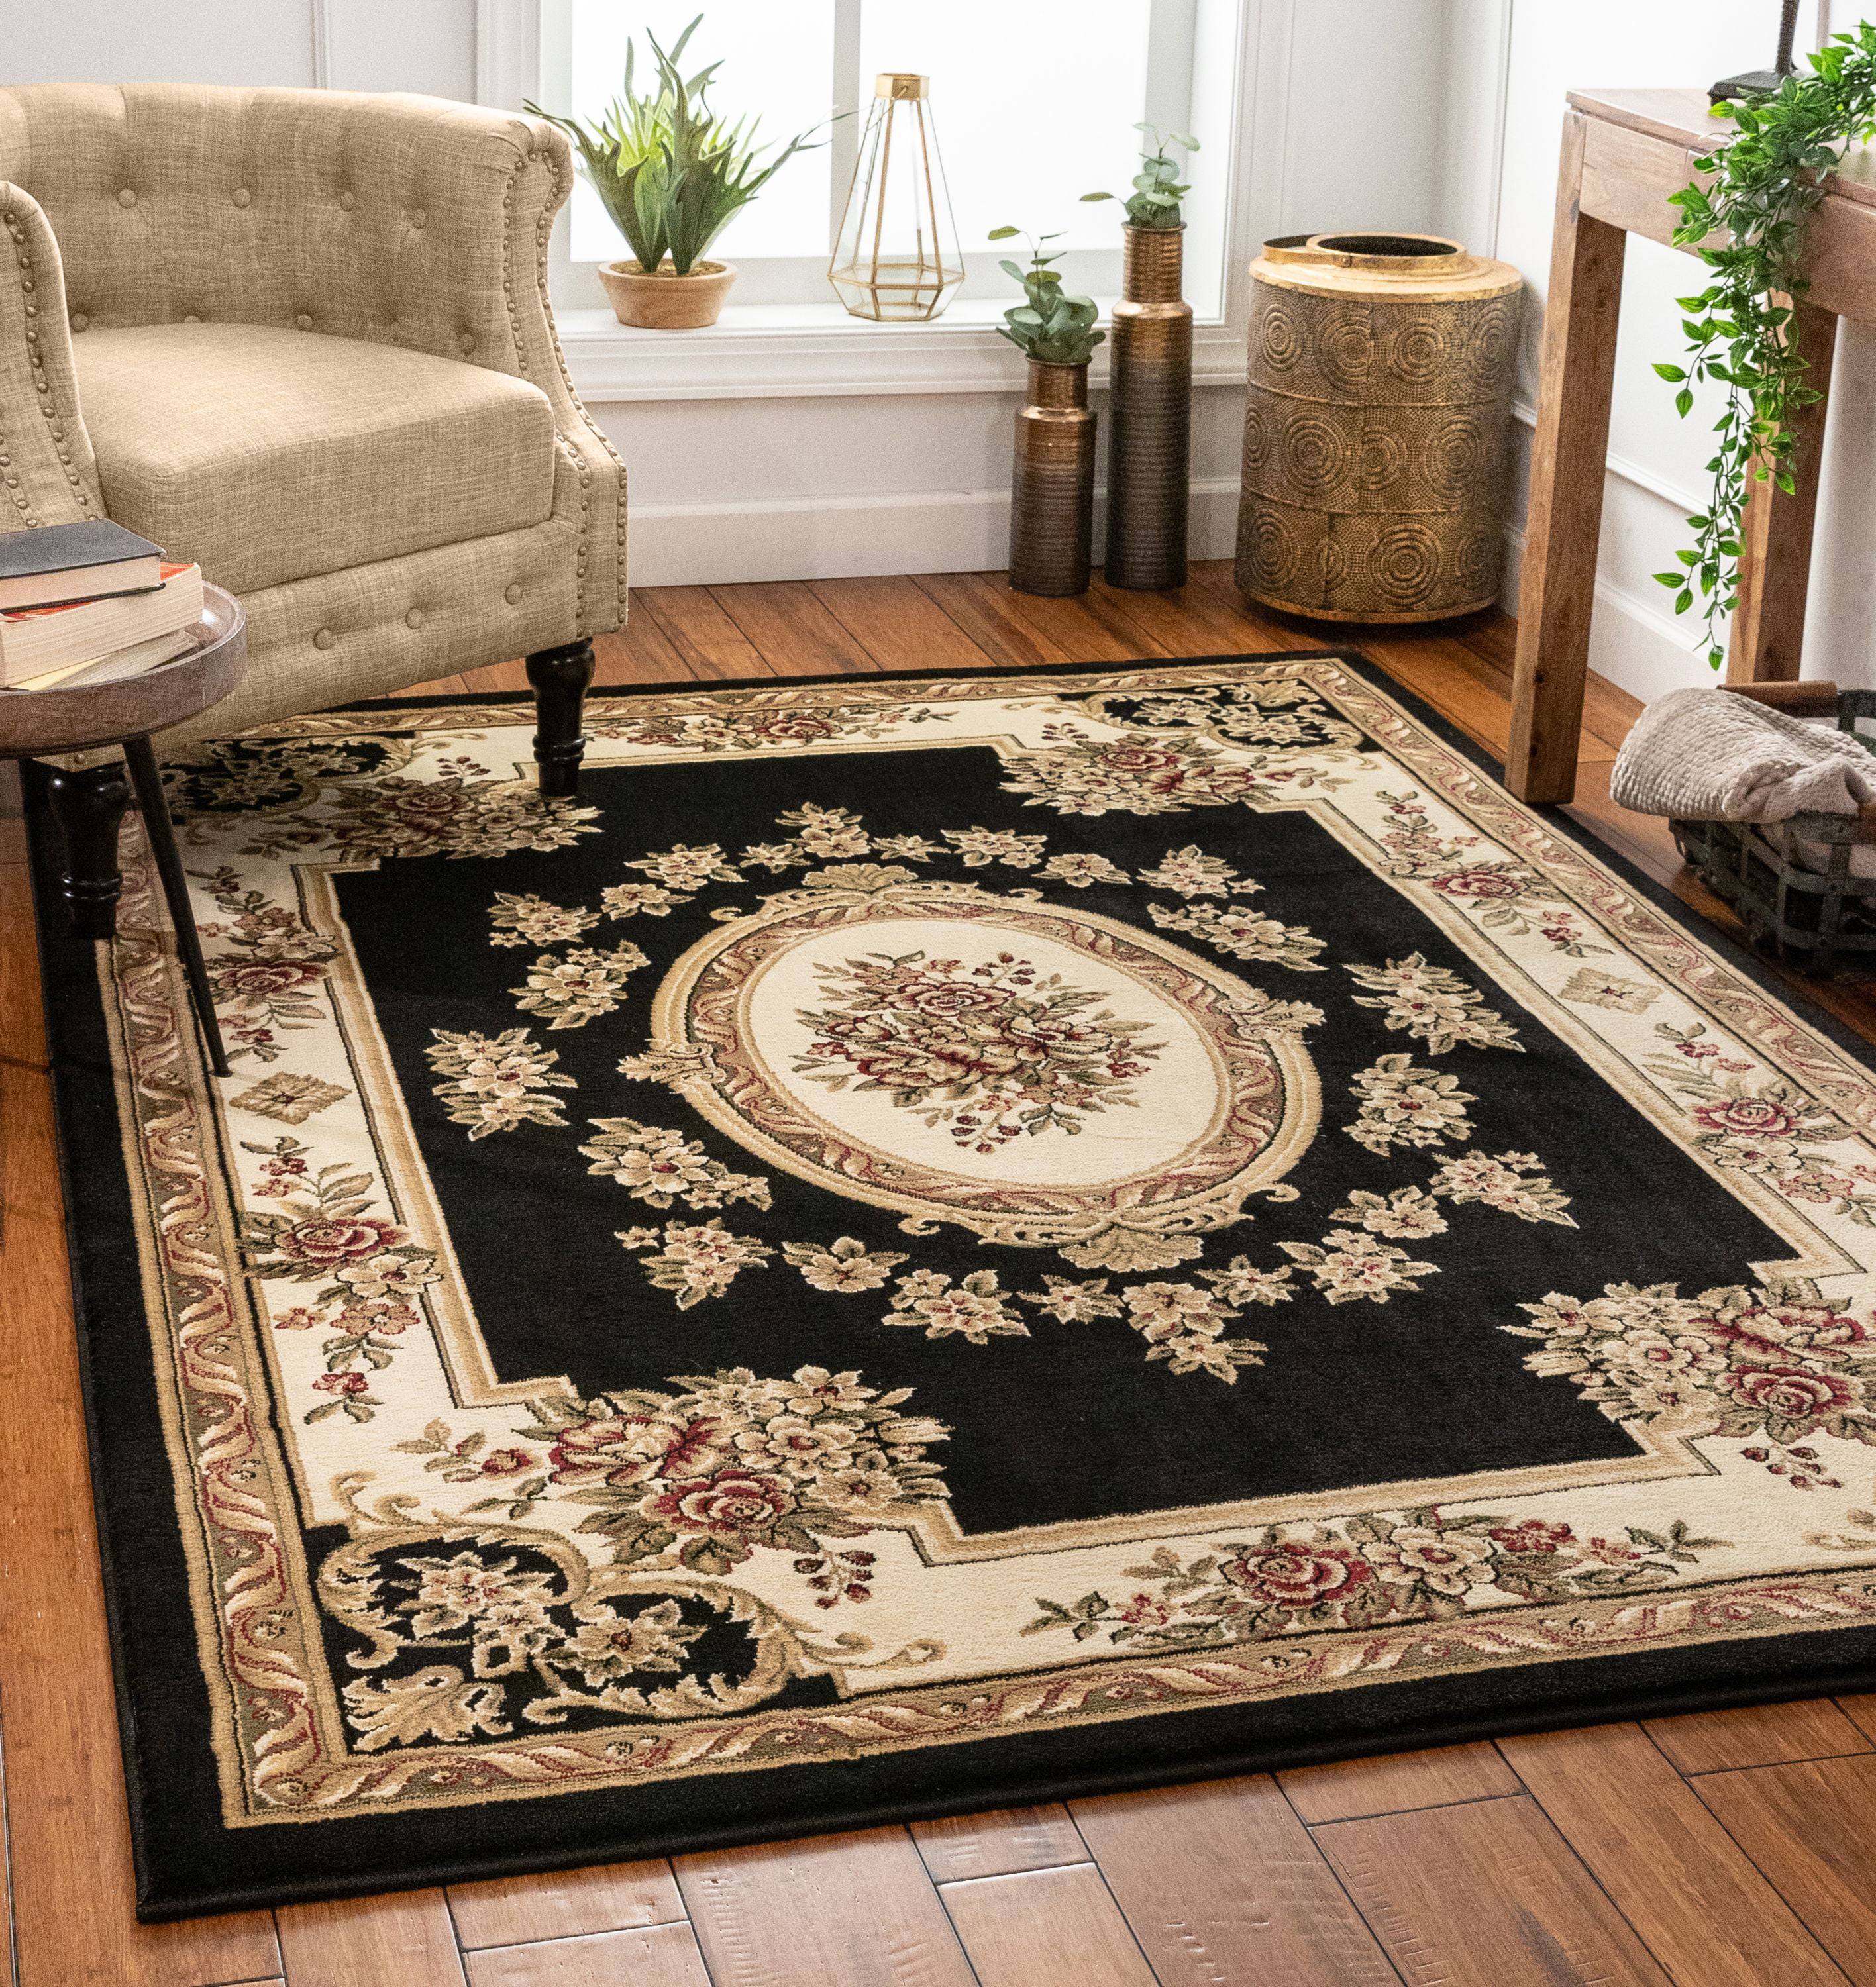 Well Woven Pastoral Medallion Black French European Formal Traditional 5x7 53 X 73 Area Rug Easy To Clean Stain Fade Resistant Modern Contemporary Floral Thick Soft Plush Living Dining Room Rug Walmartcom